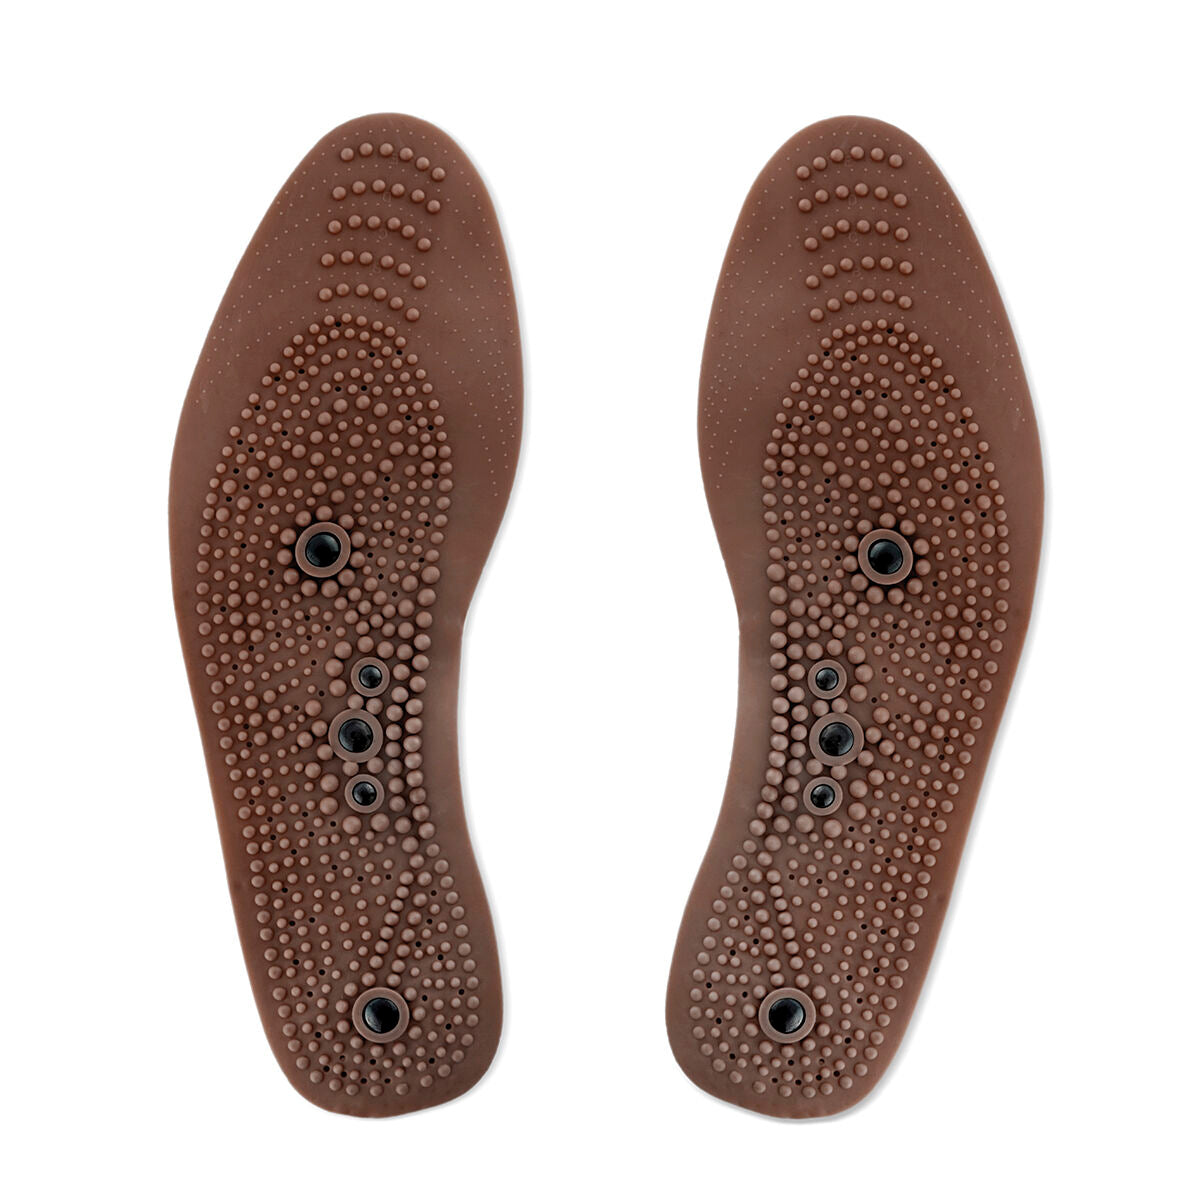 InnovaGoods Pressure Points Magnetic Insoles